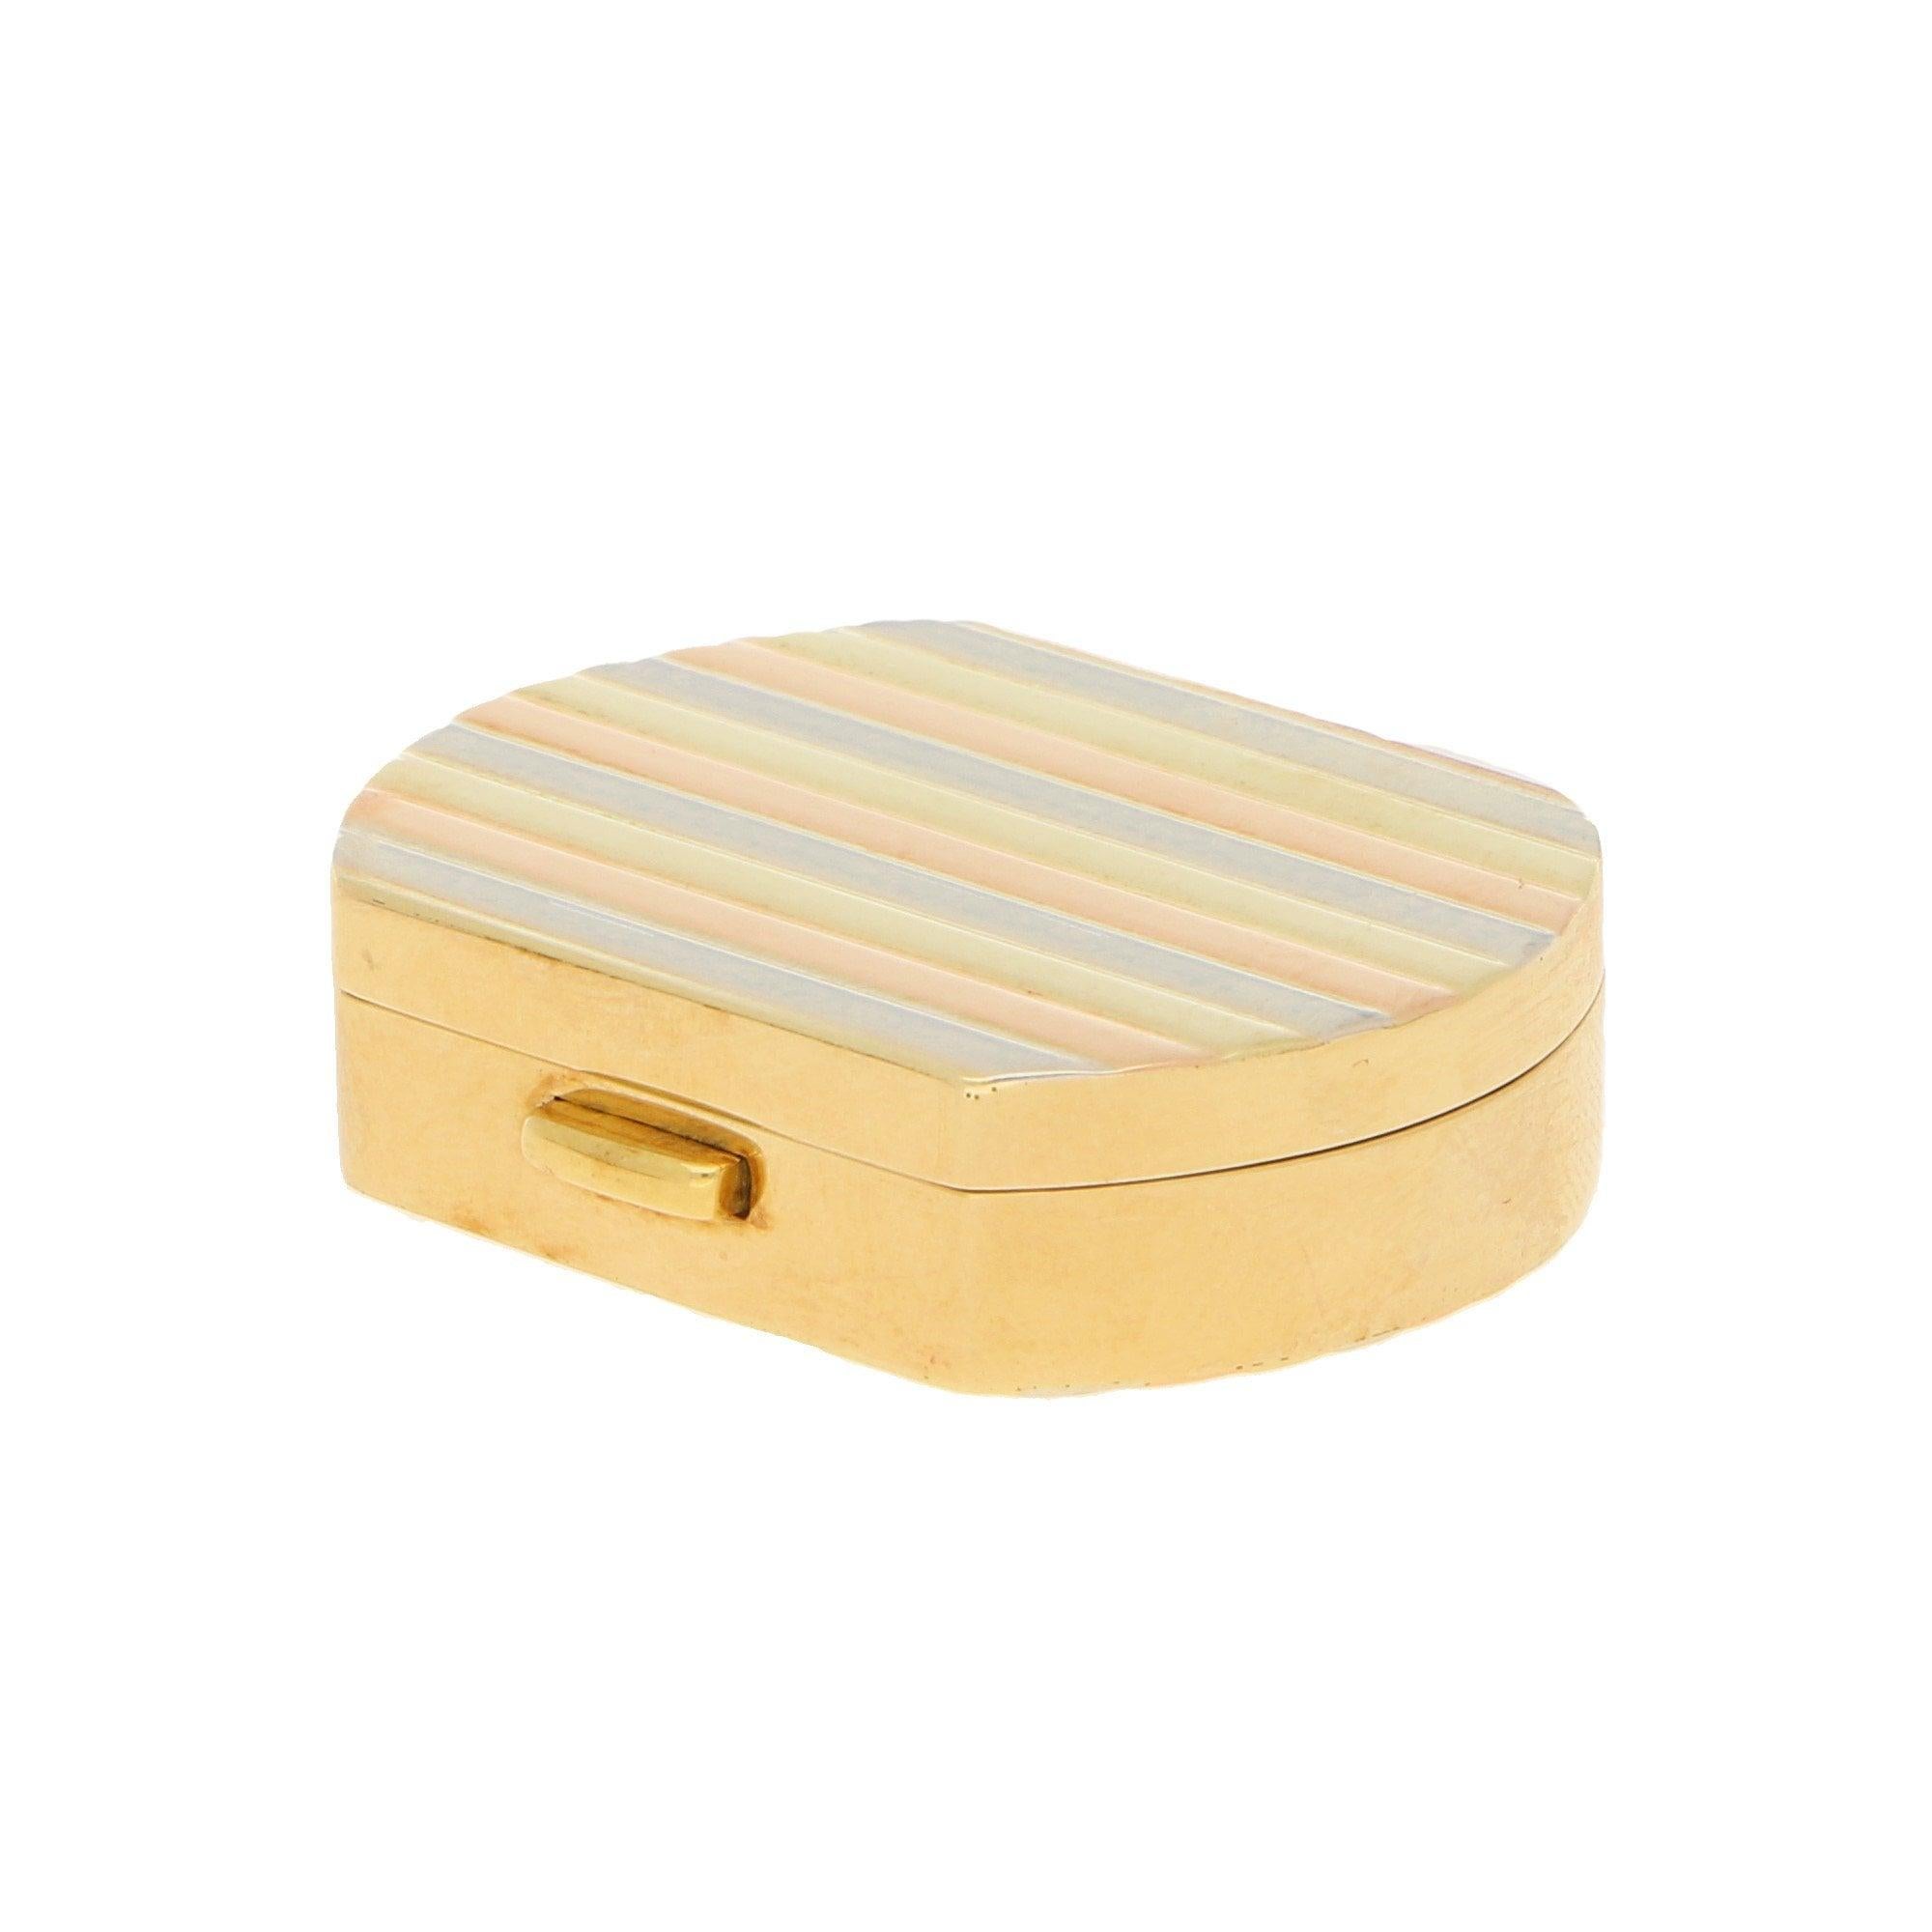 A vintage Italian pill box in 18-karat tricolour gold, circa 1990. This pill box of a cushion design features banded accents to the lid and base in a repeated pattern of alternating white, yellow and rose gold, the sides and aperture button in